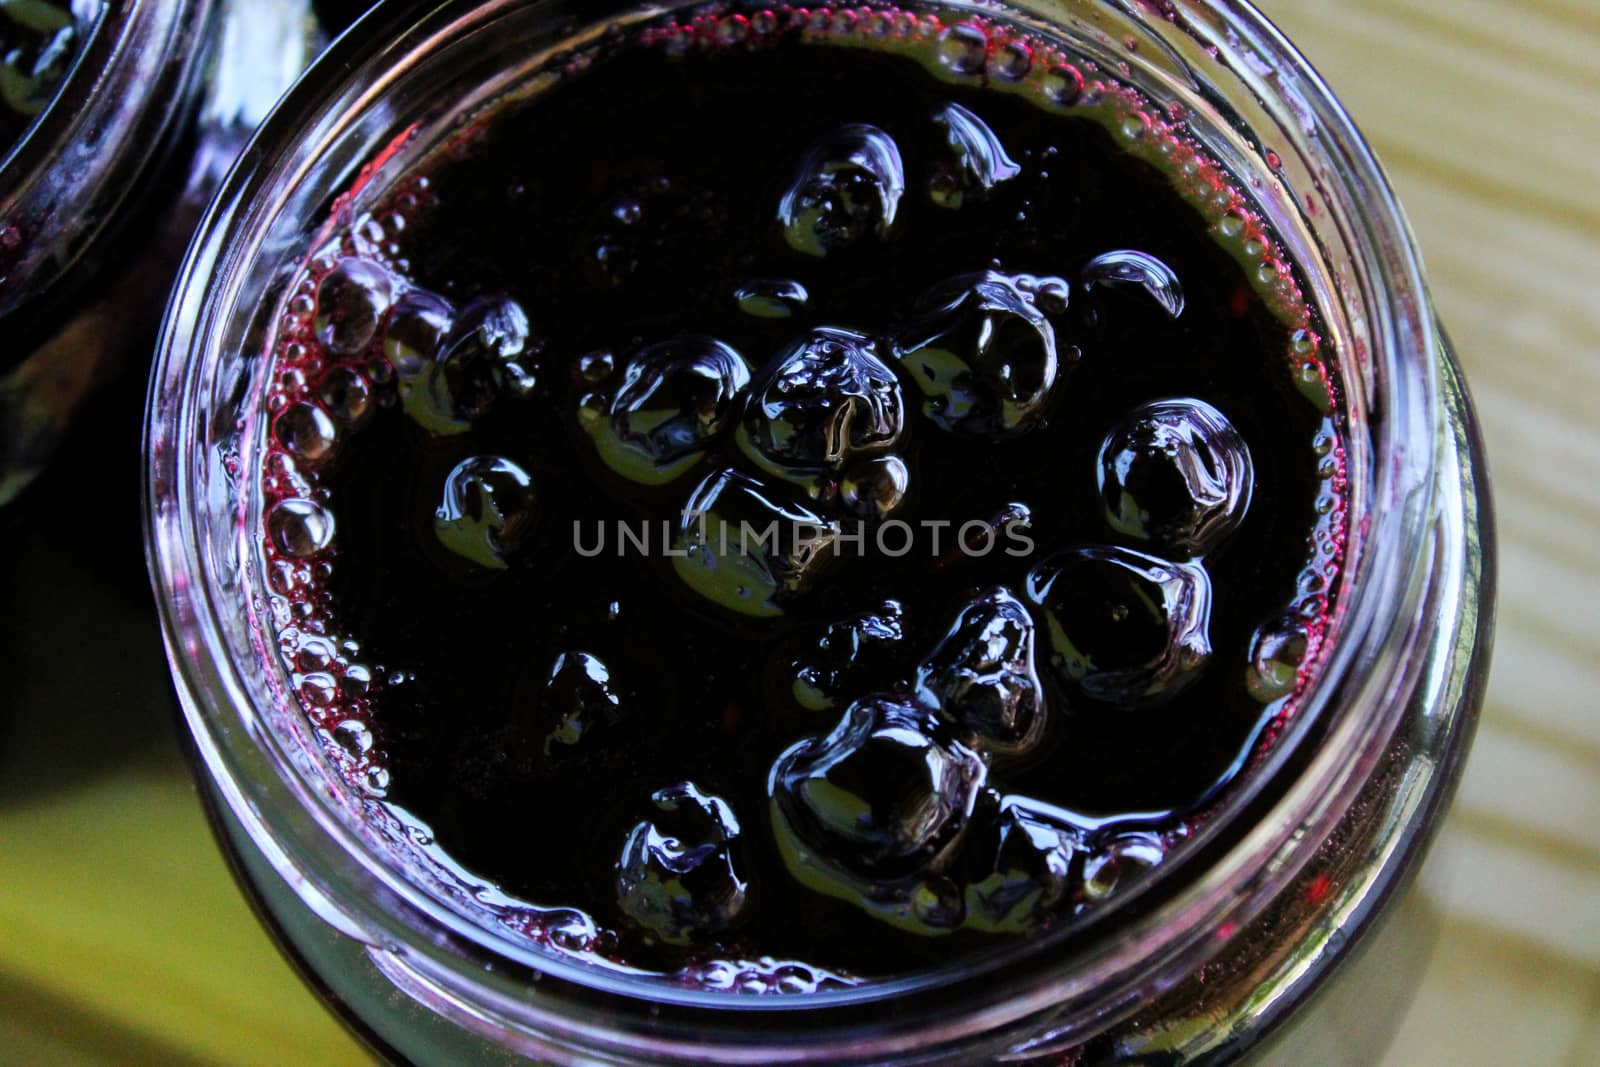 Homemade chokeberry jam. The process of filling jars in a homely way. by mahirrov